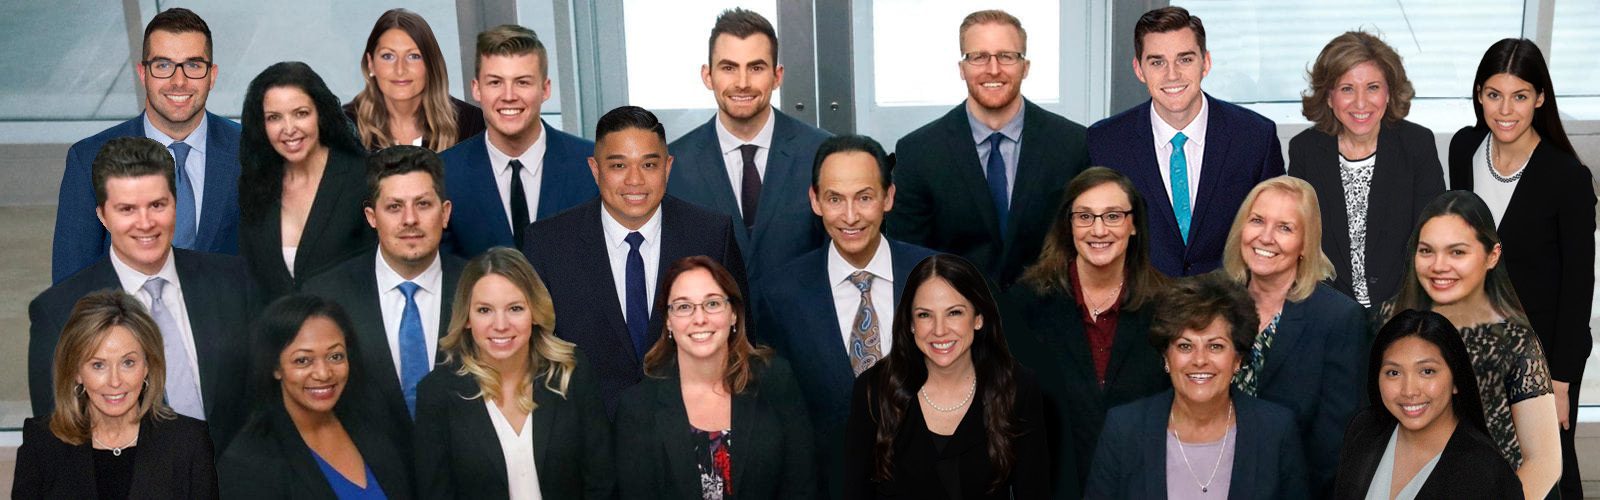 Group photo of entire Investment Counsel Company team